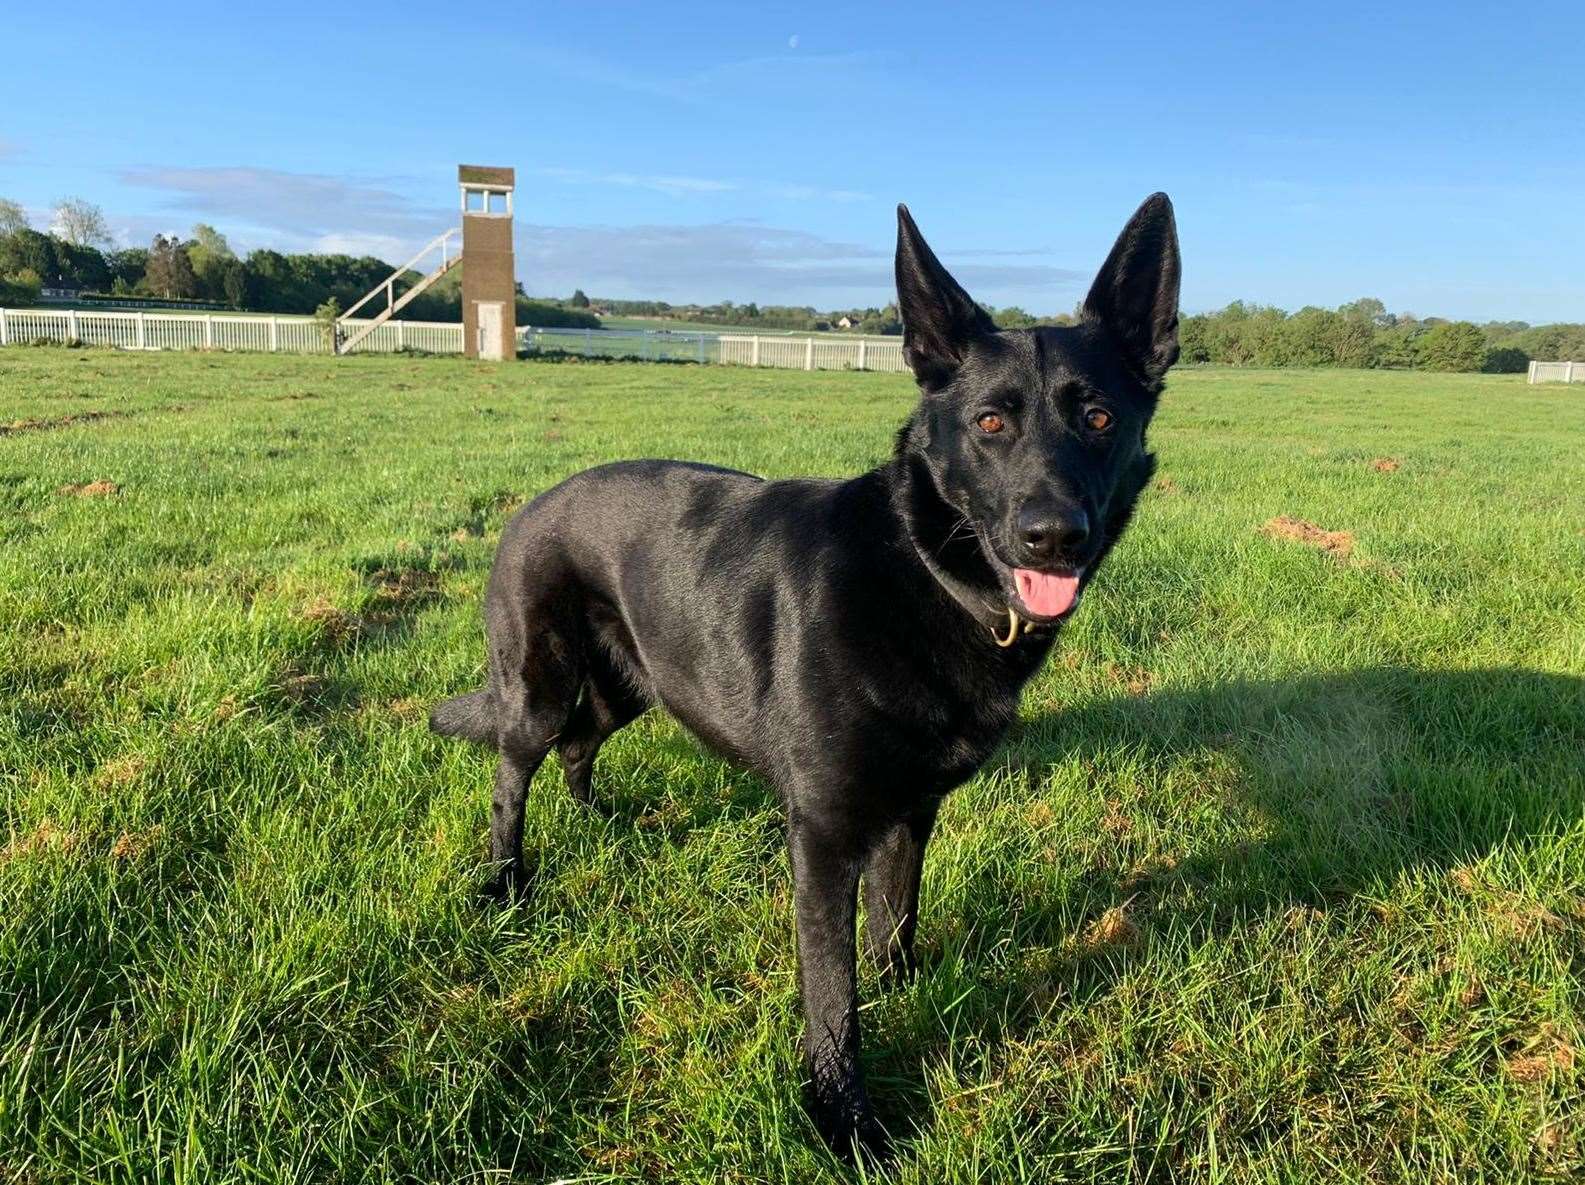 Police dog Elsa and her handler helped in the arrest of suspects following the discovery of a cannabis farm in Swanley